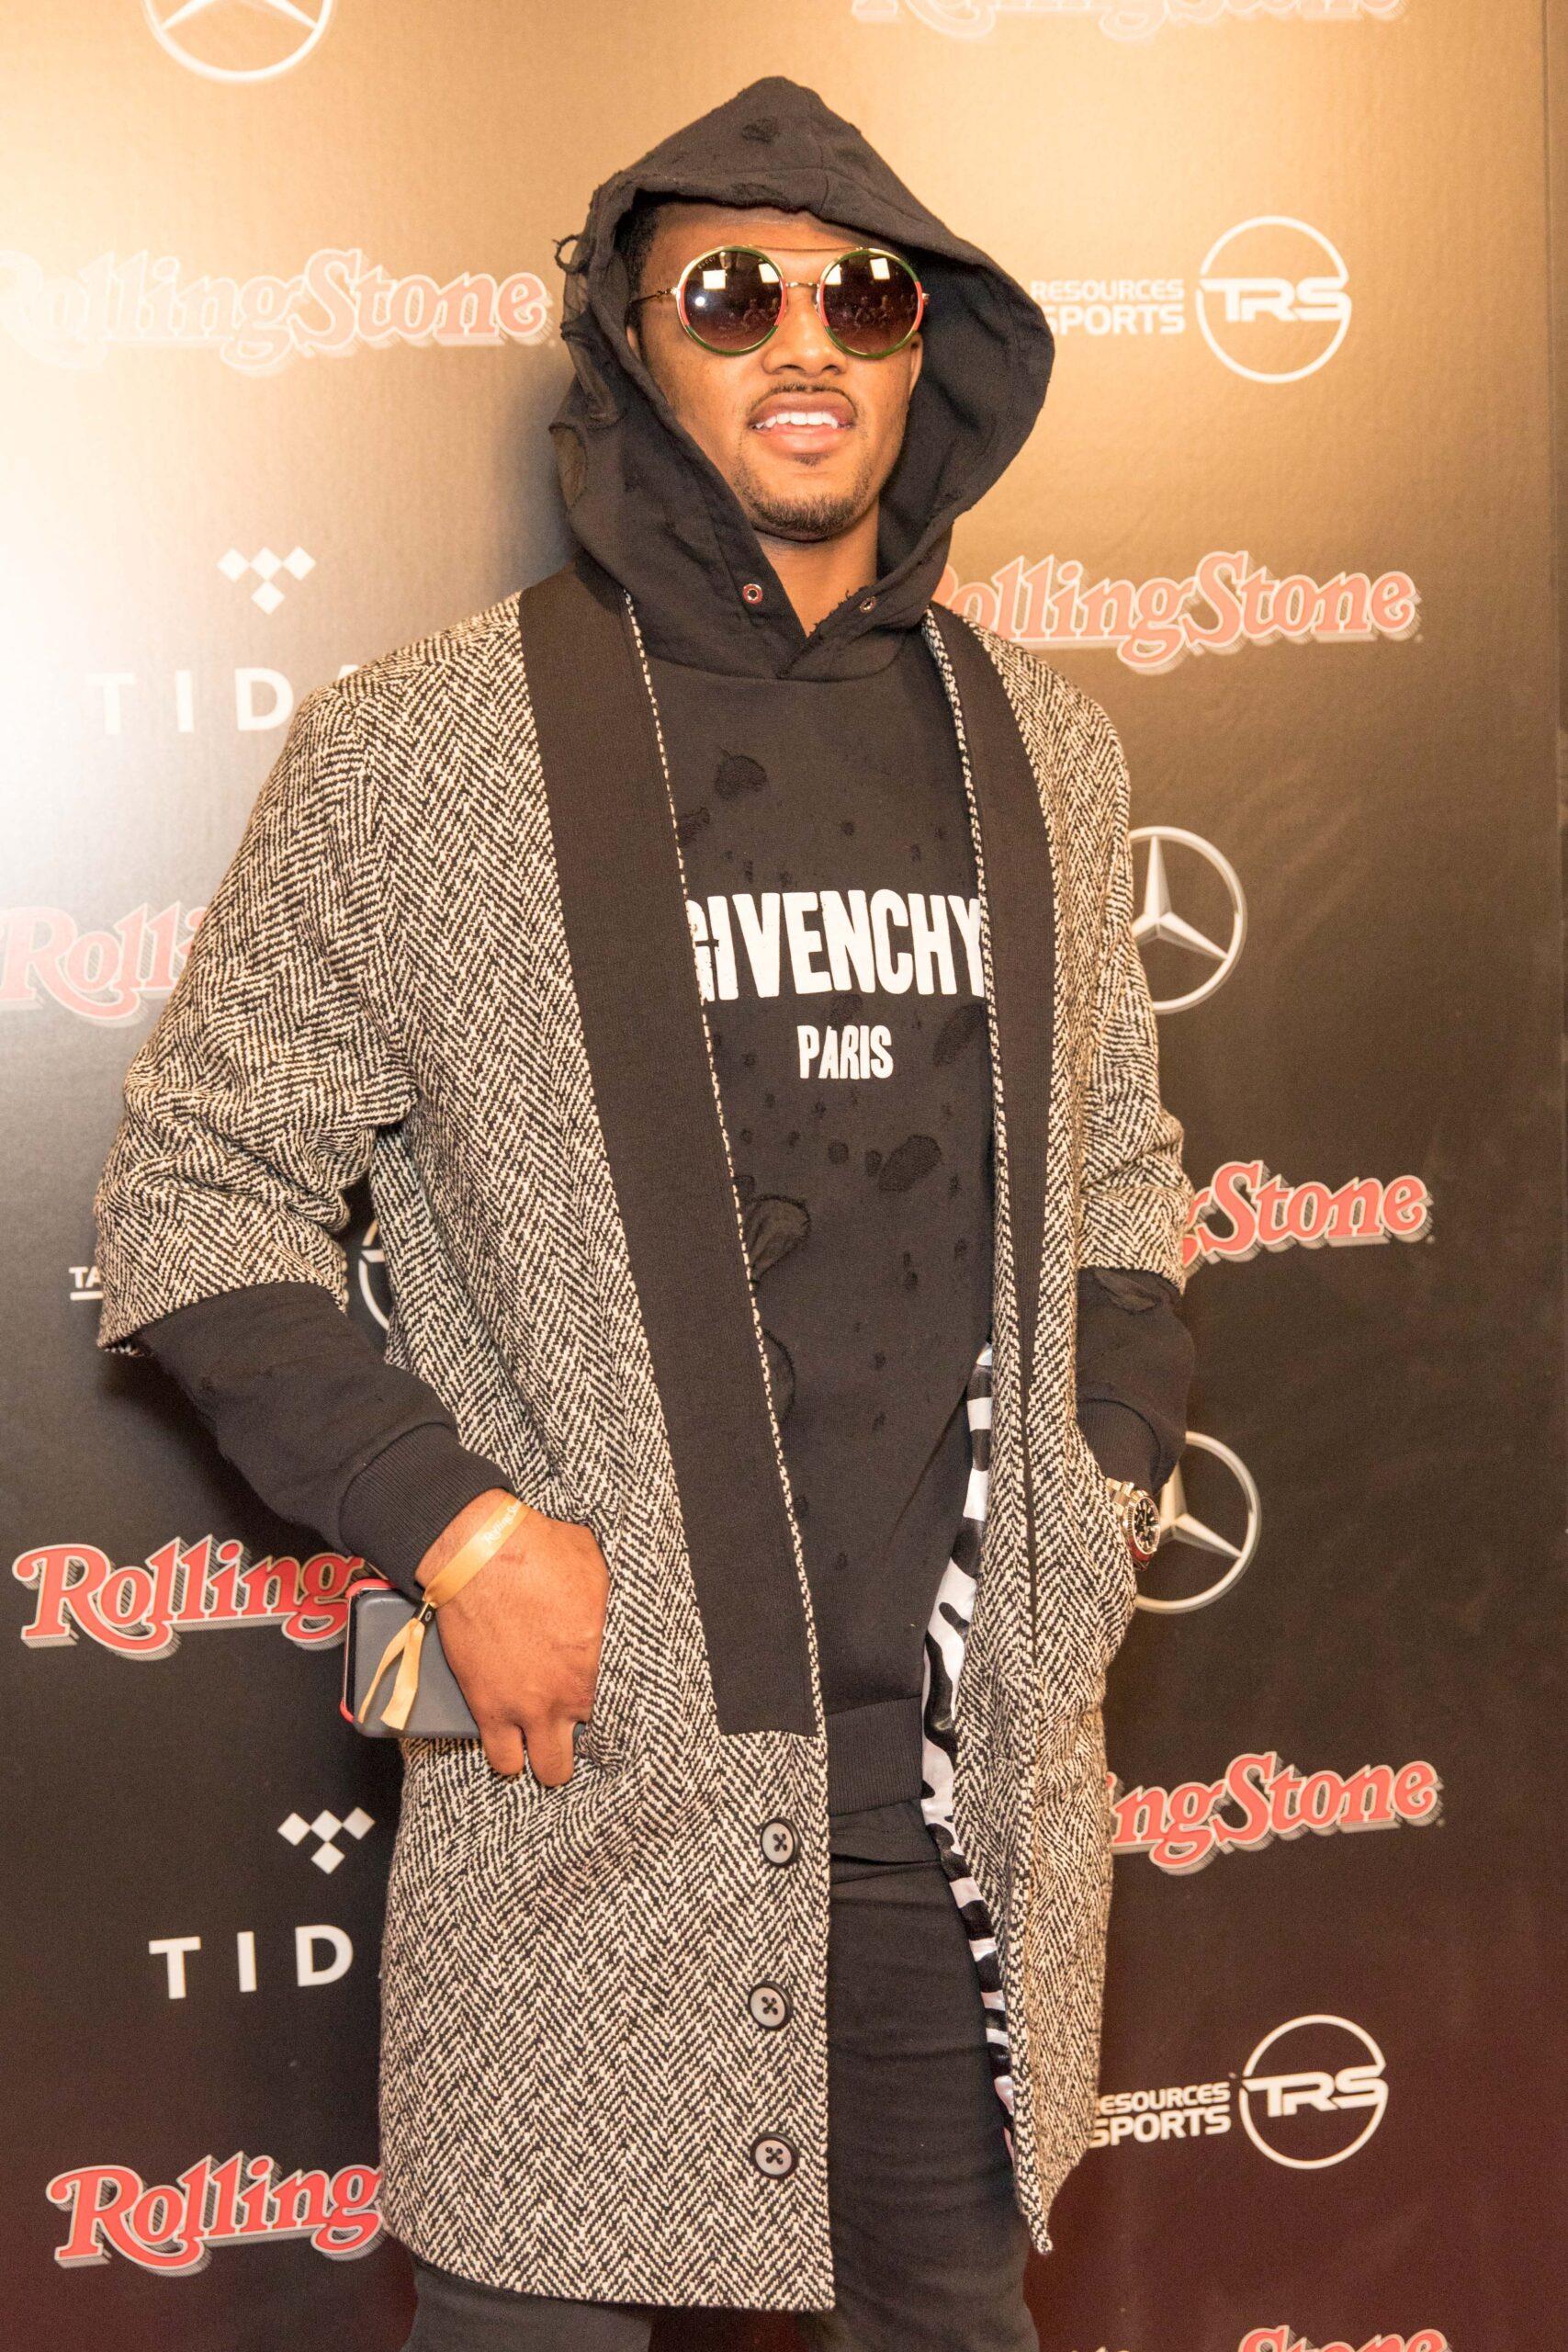 Deshaun Watson attends Rolling Stone Super Bowl Party 2018 during Super Bowl LII Week in Minneapolis